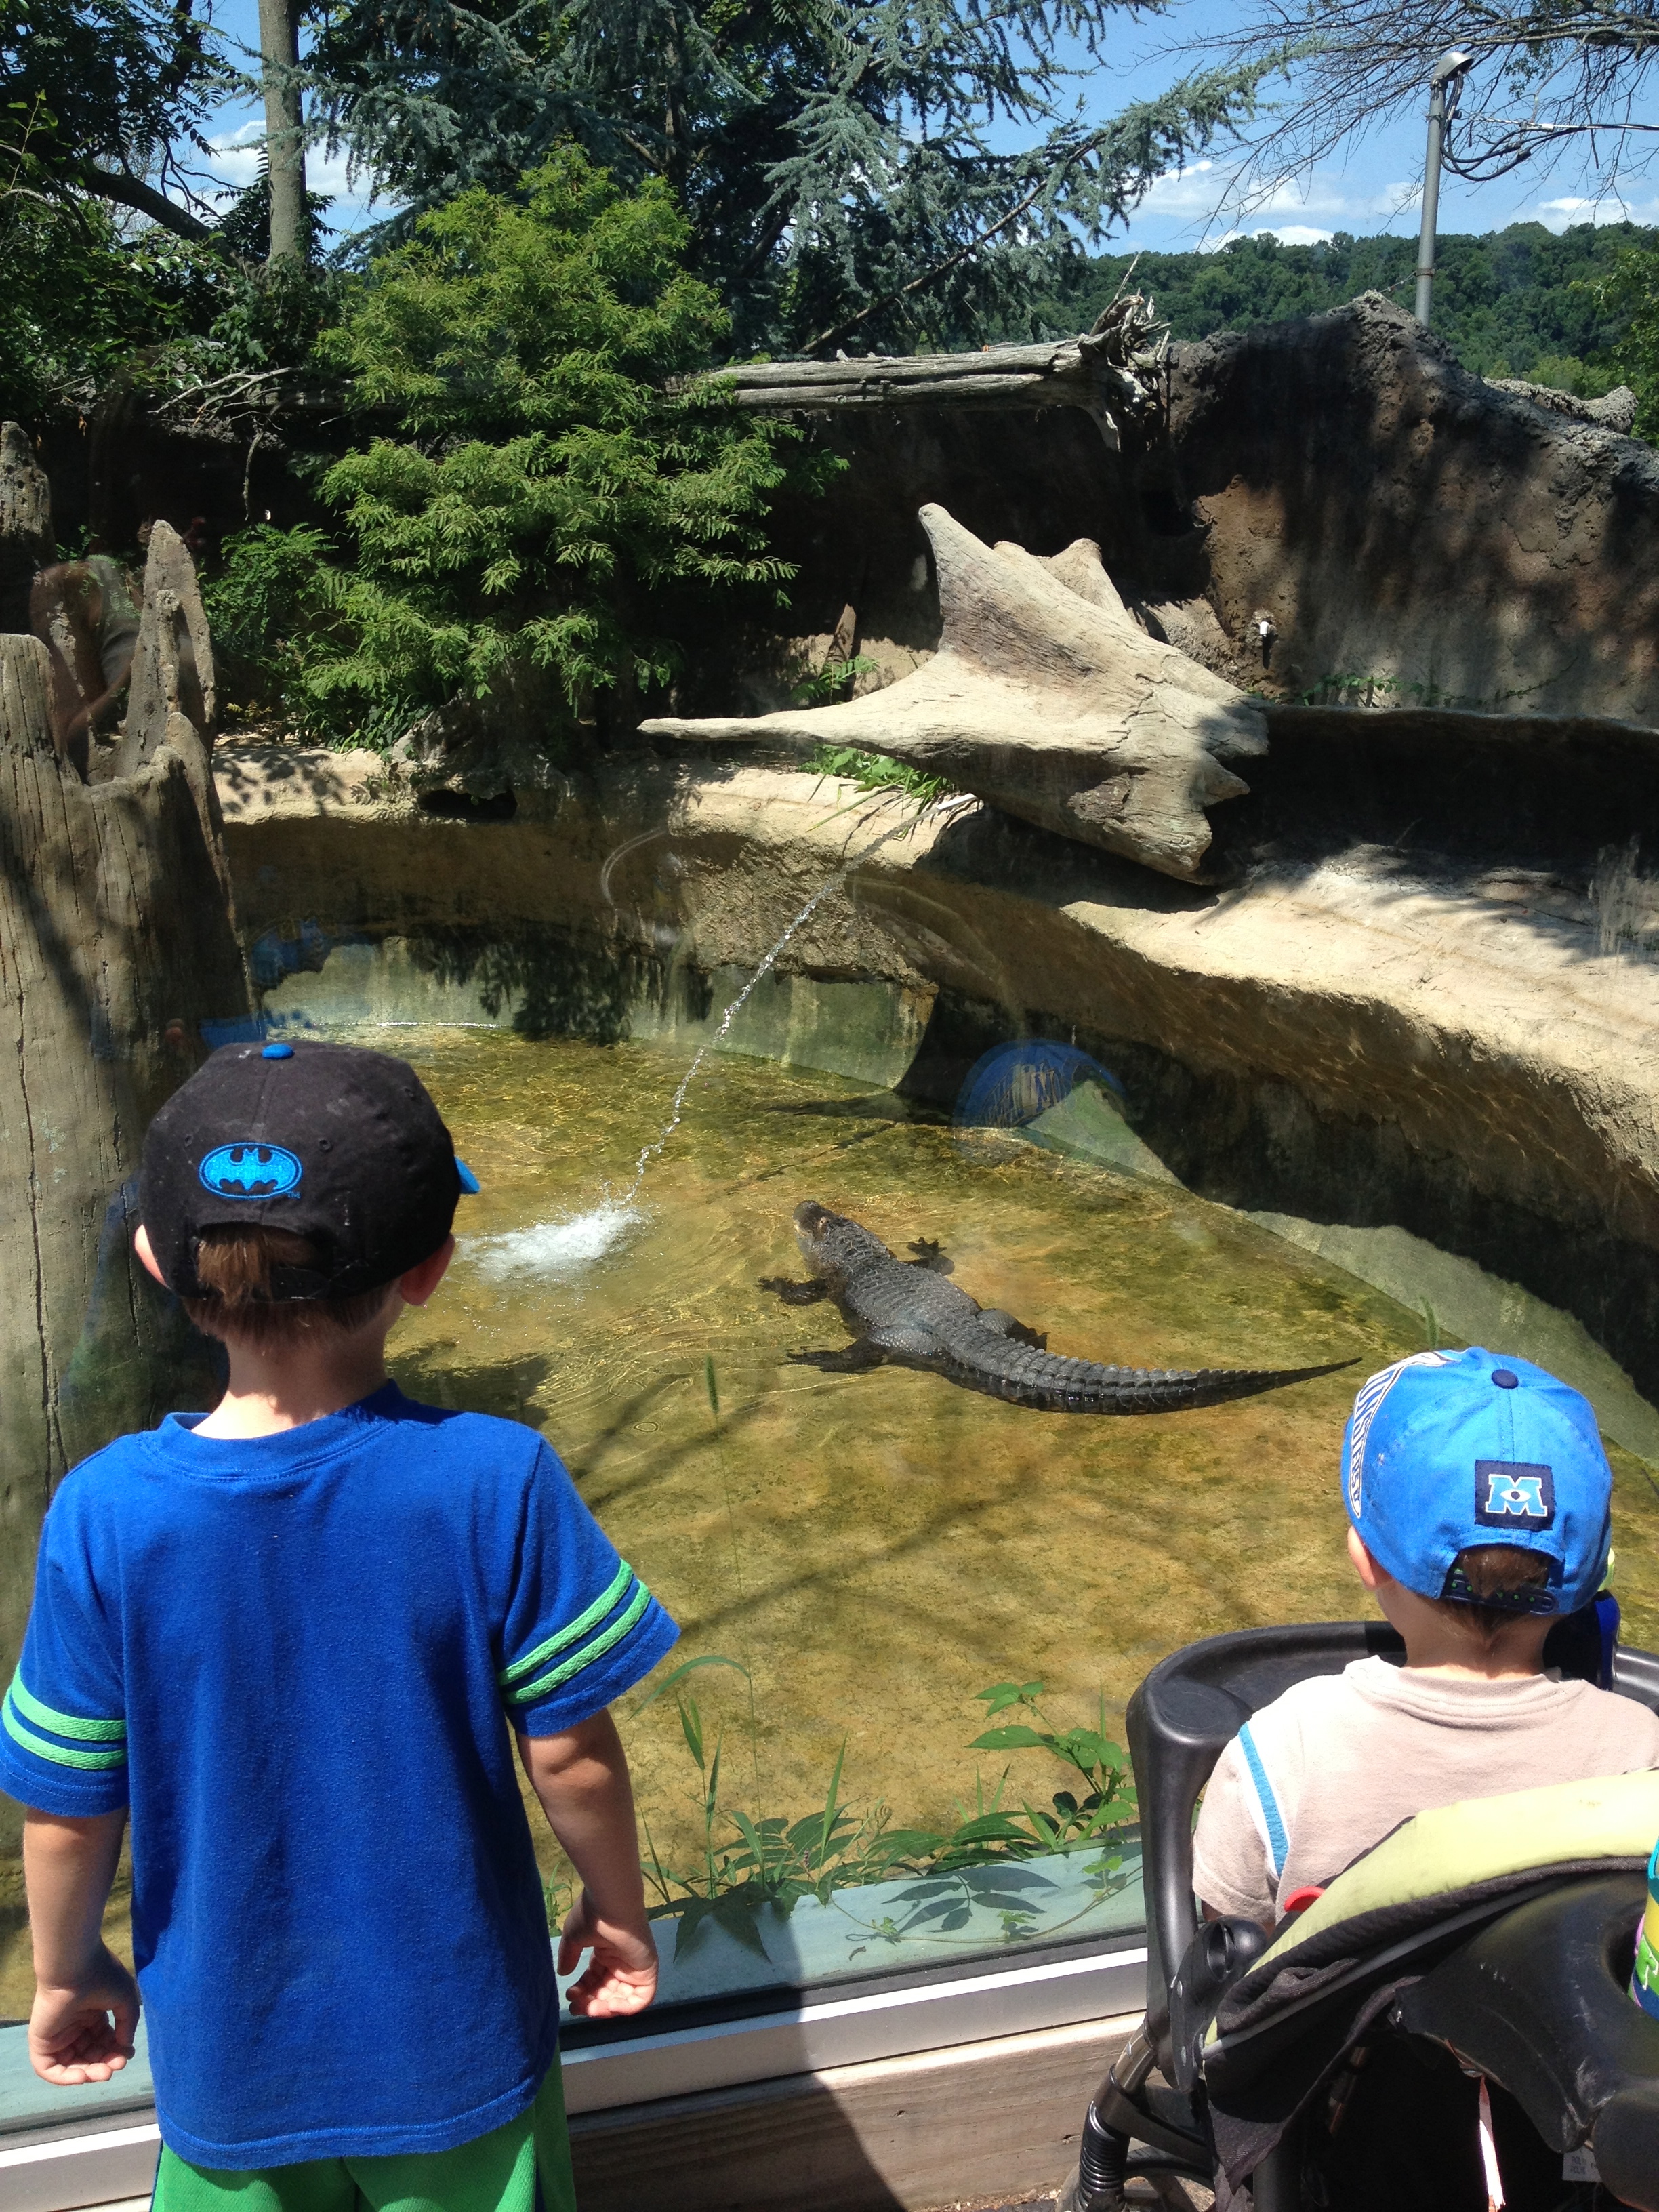 The boys loved seeing the alligator at Turtle Back Zoo!